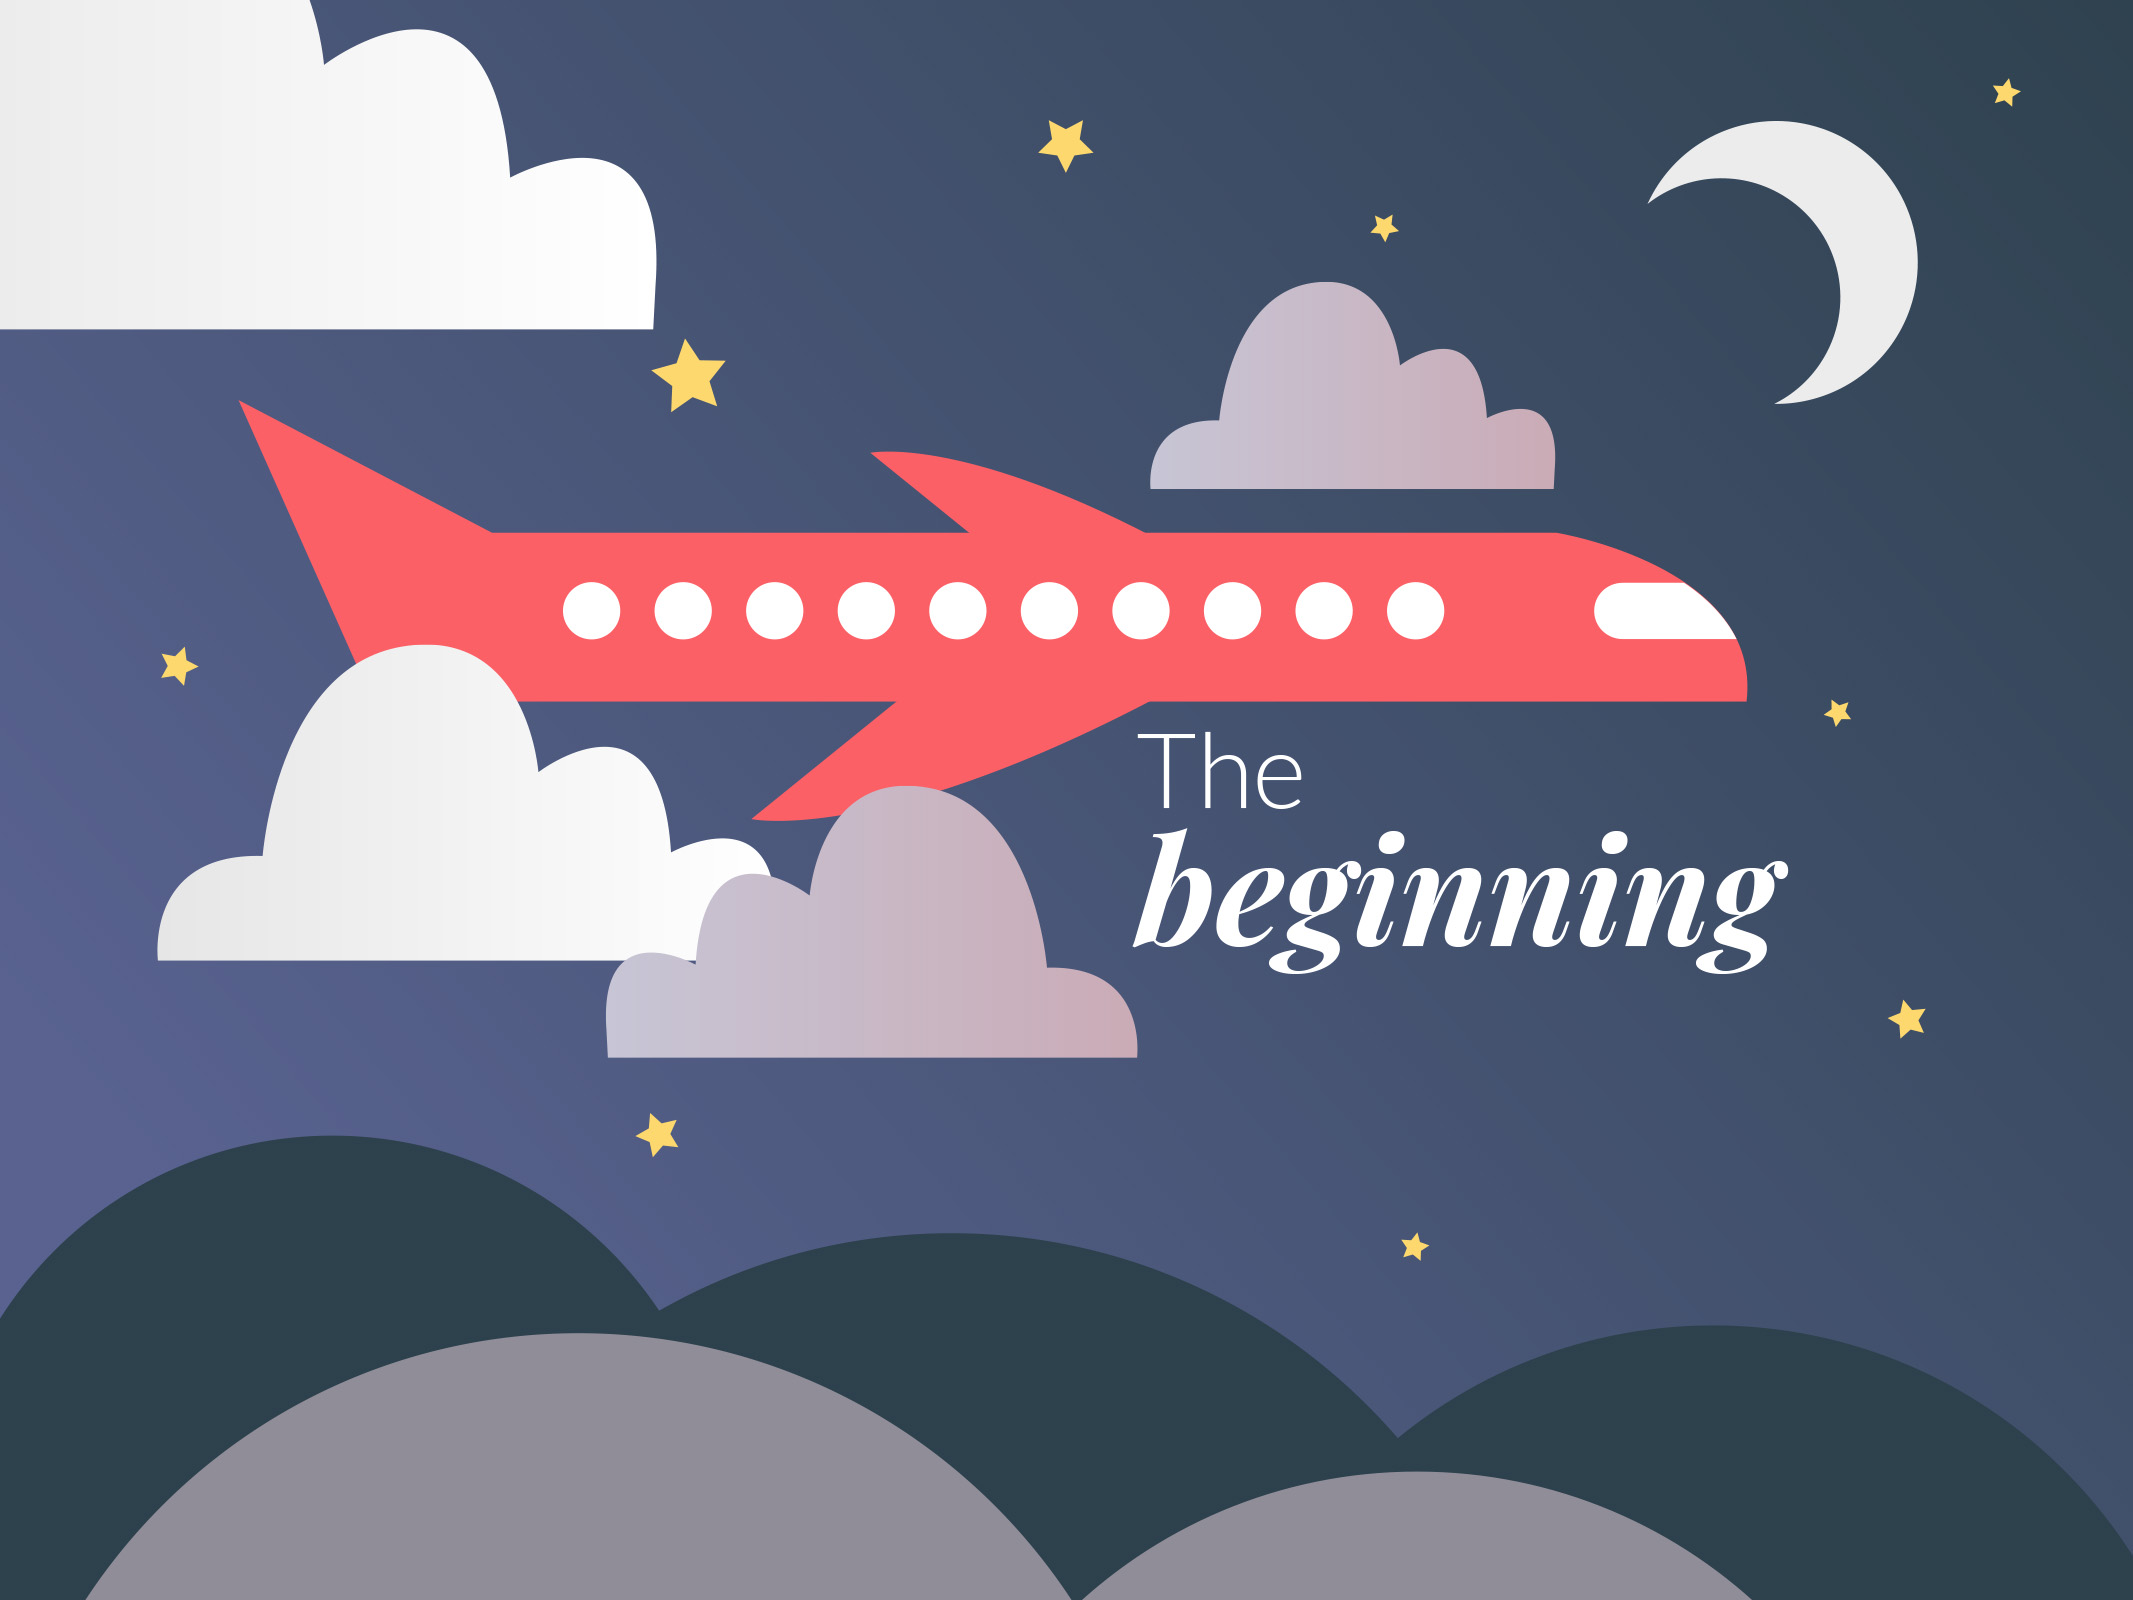 Vector illustration portrays a purple night sky with clouds and stars. An orange aeroplane is soaring over silhouetted hills. The image includes the words 'The Beginning' in white text. 